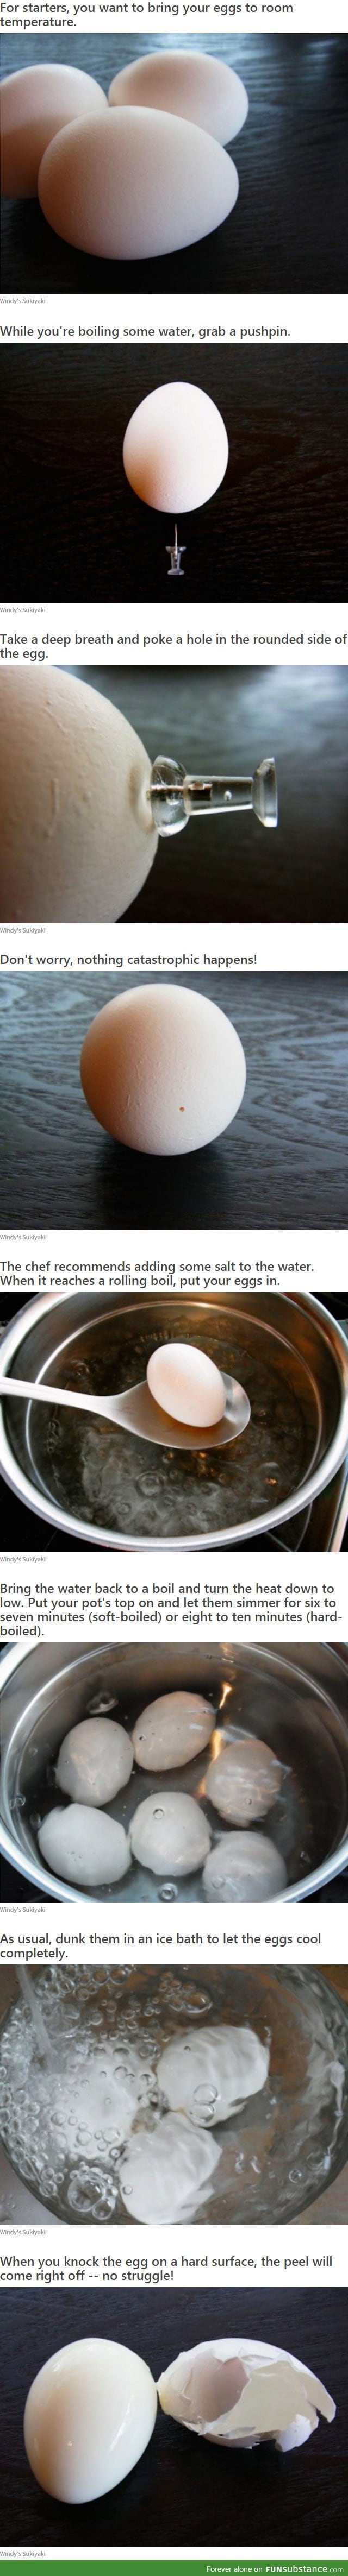 How To Cook Eggs So The Shells Are Easy To Peel